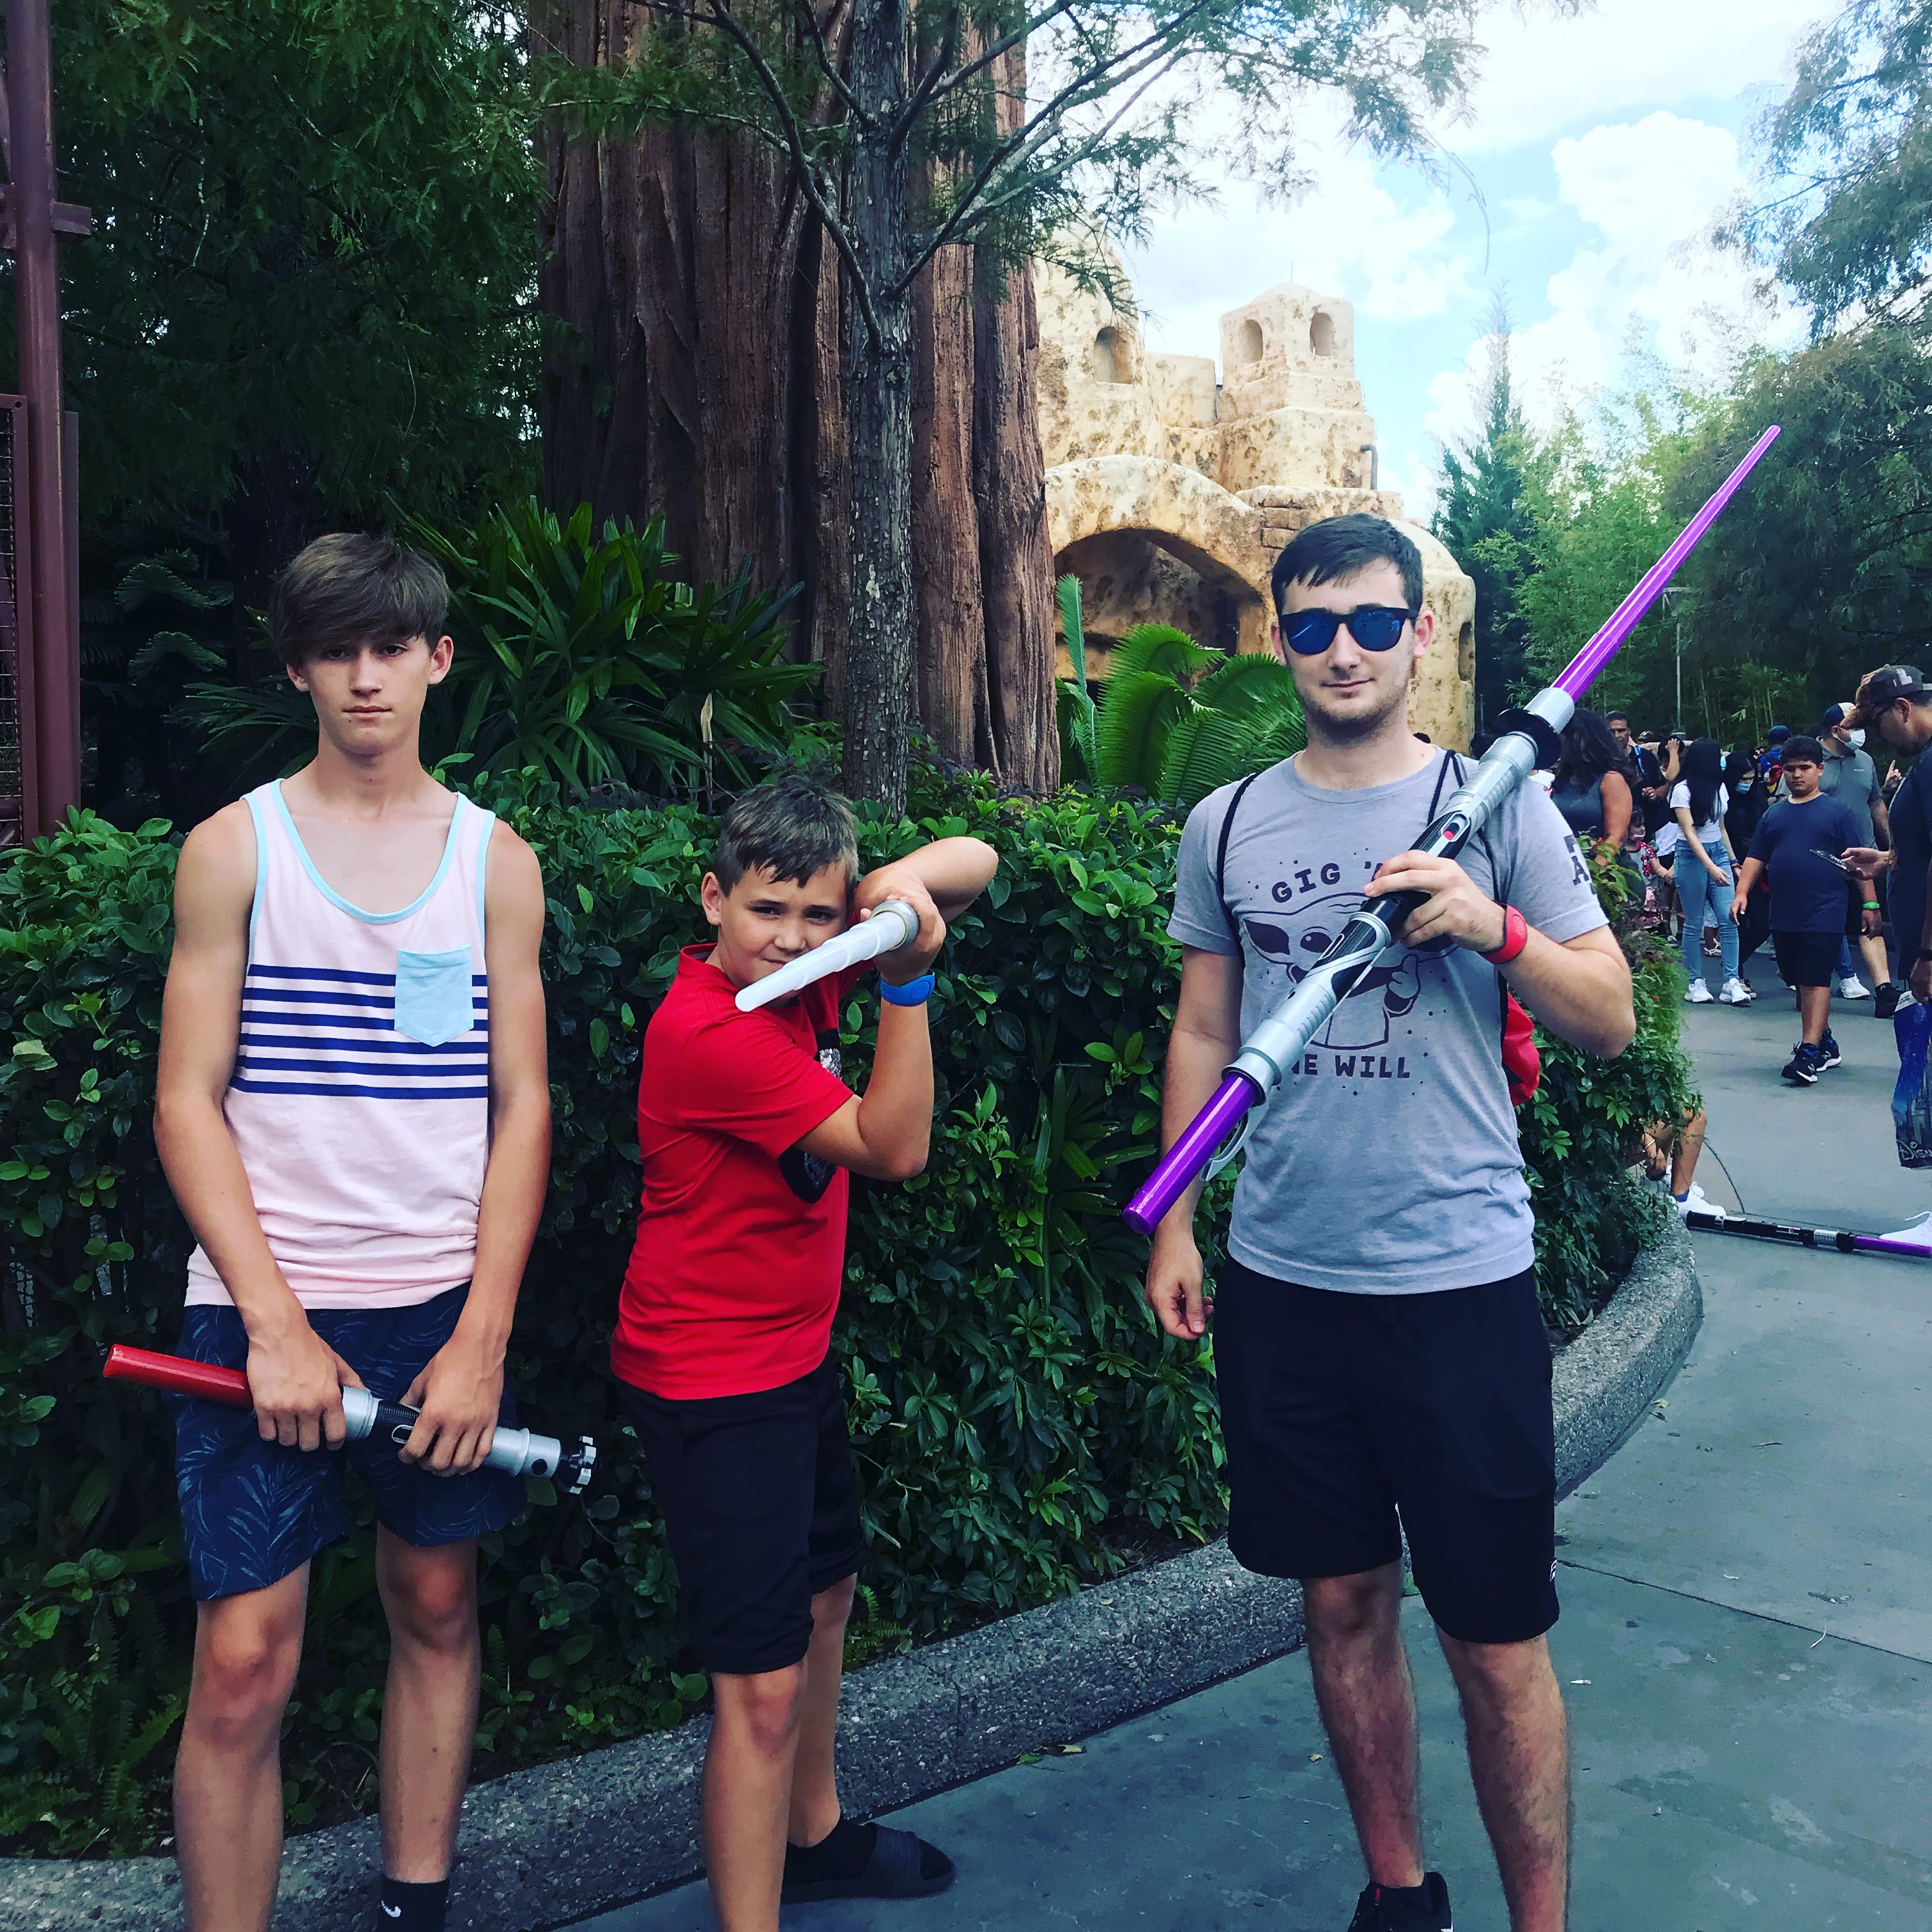 Disney World and Universal Studios Florida Experience Part 1. Tickets and Road Trip.